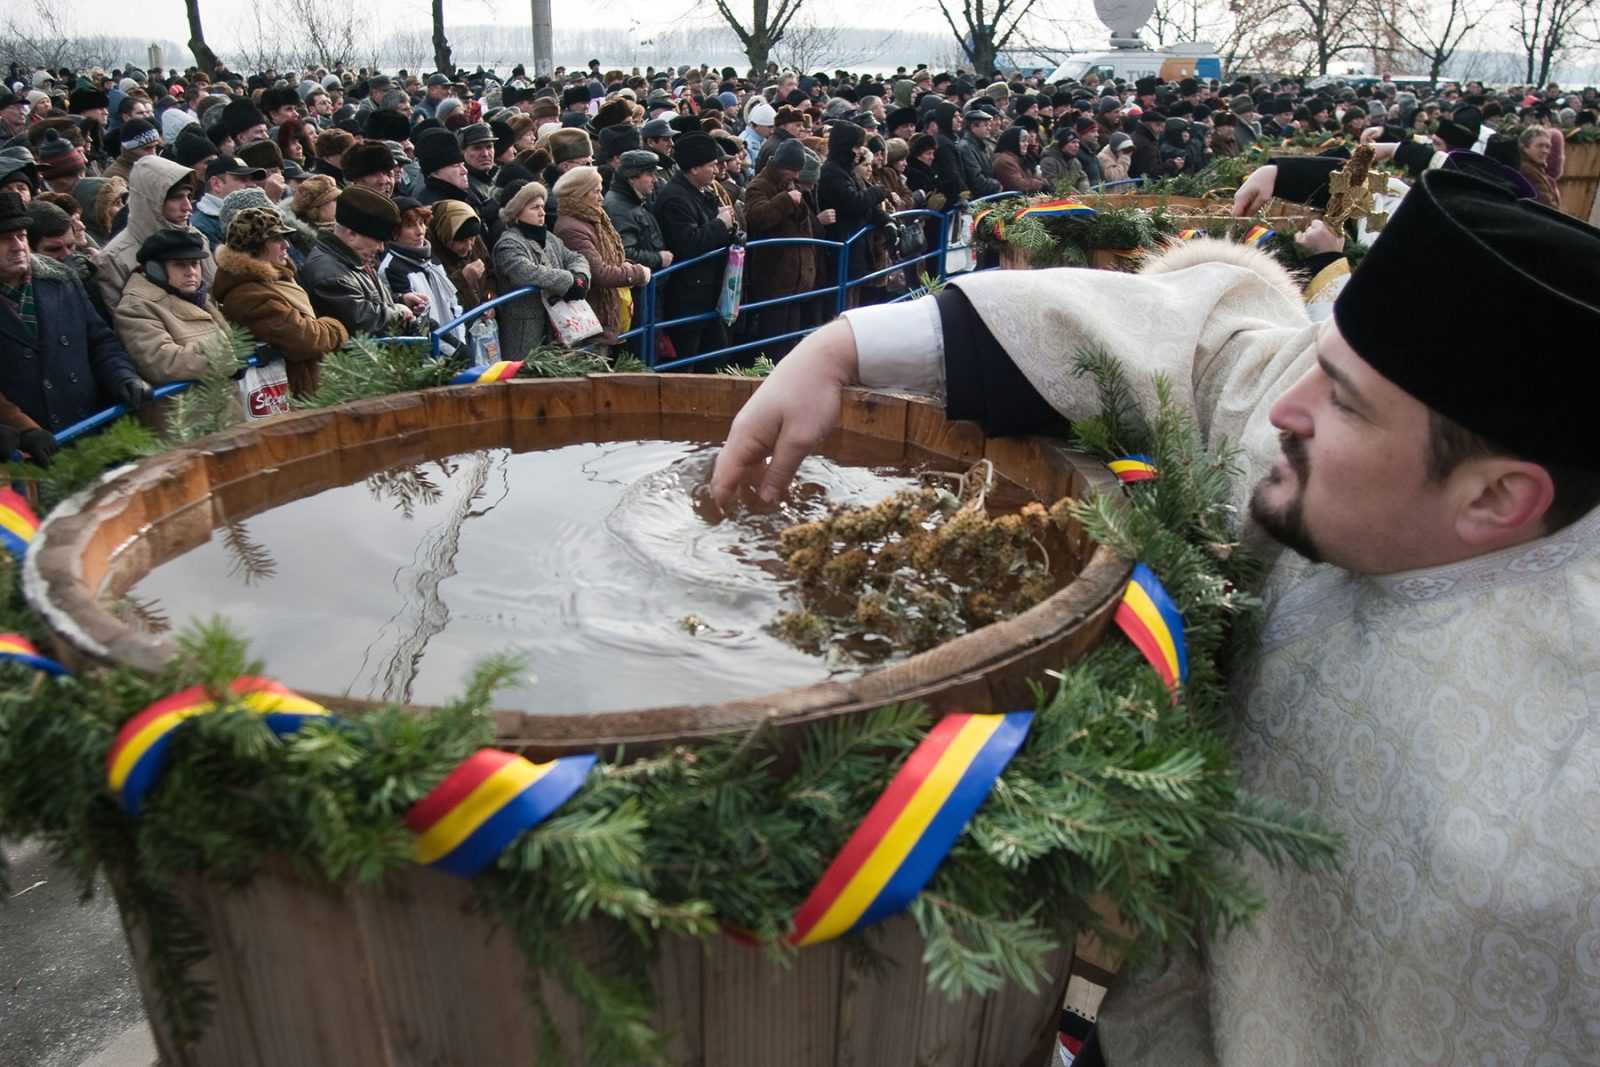 A priest sanctifies the water in Epiphany ceremony that took place in Galați, Romania on January 6th, 2009.